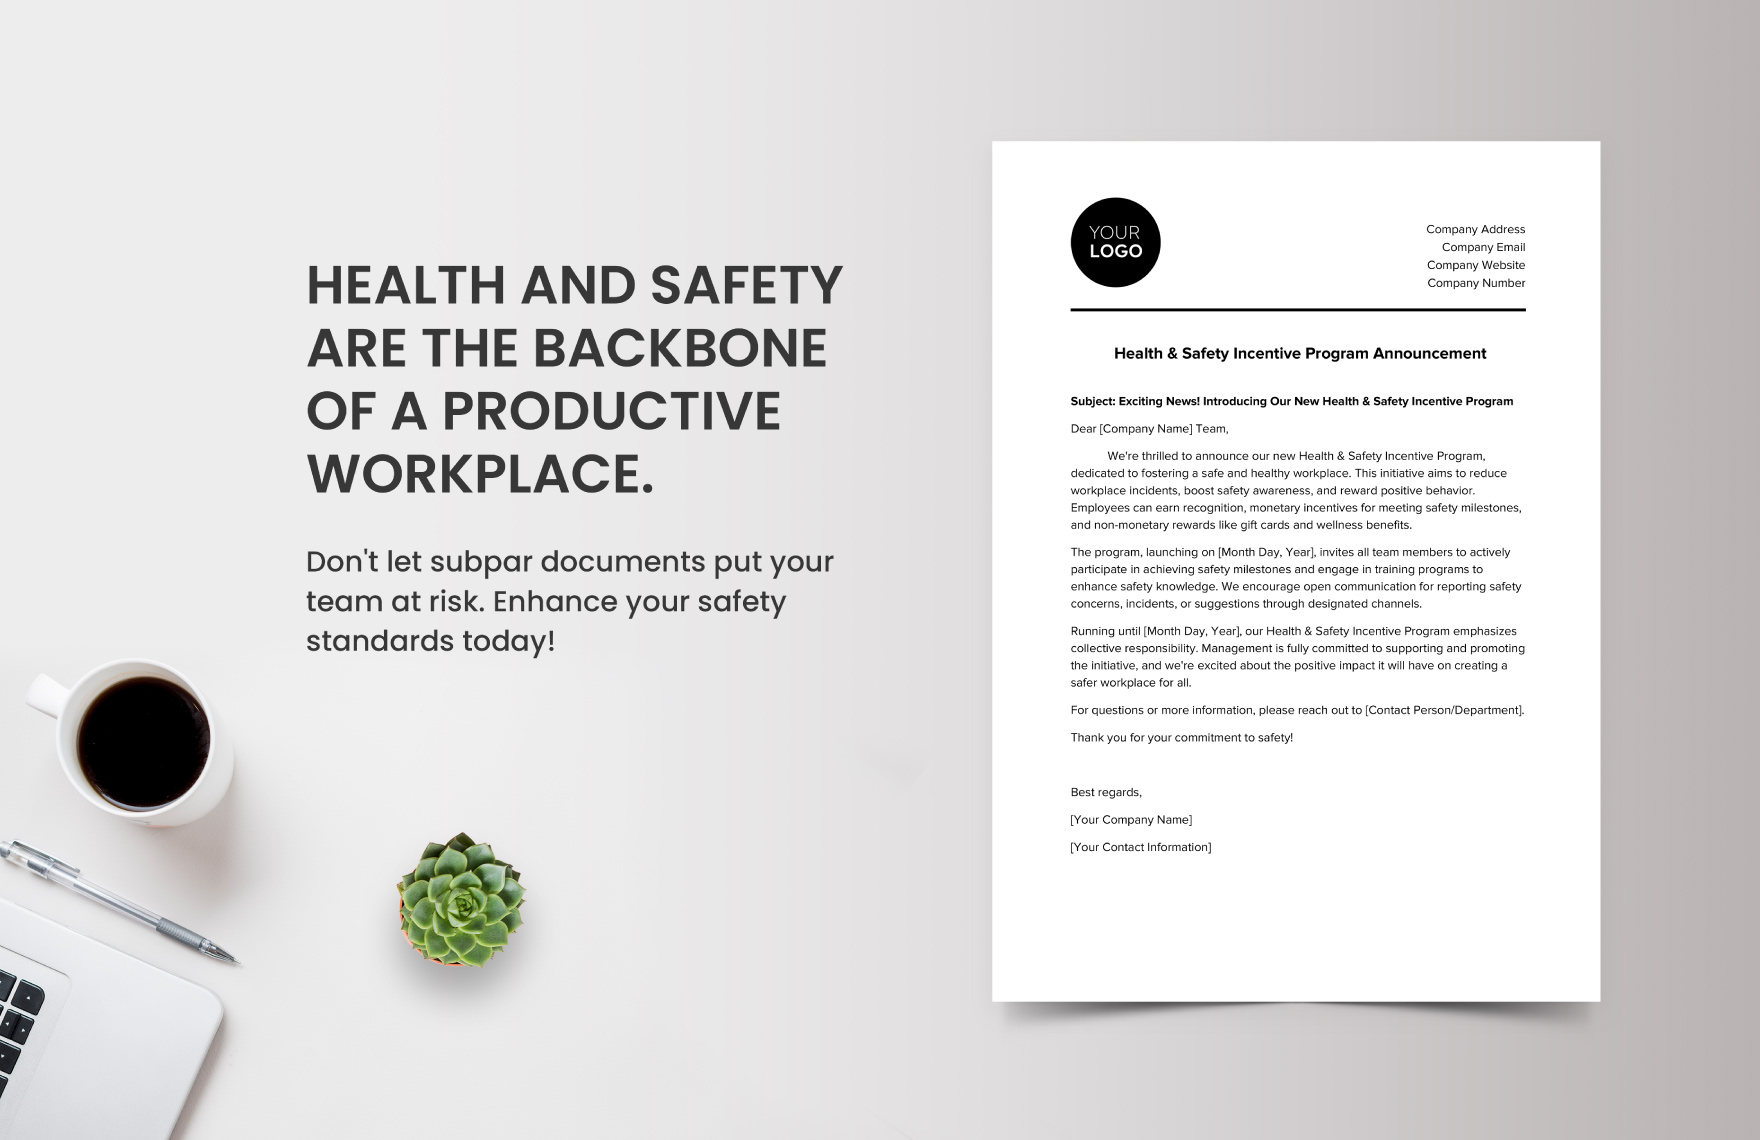 Health & Safety Incentive Program Announcement Template